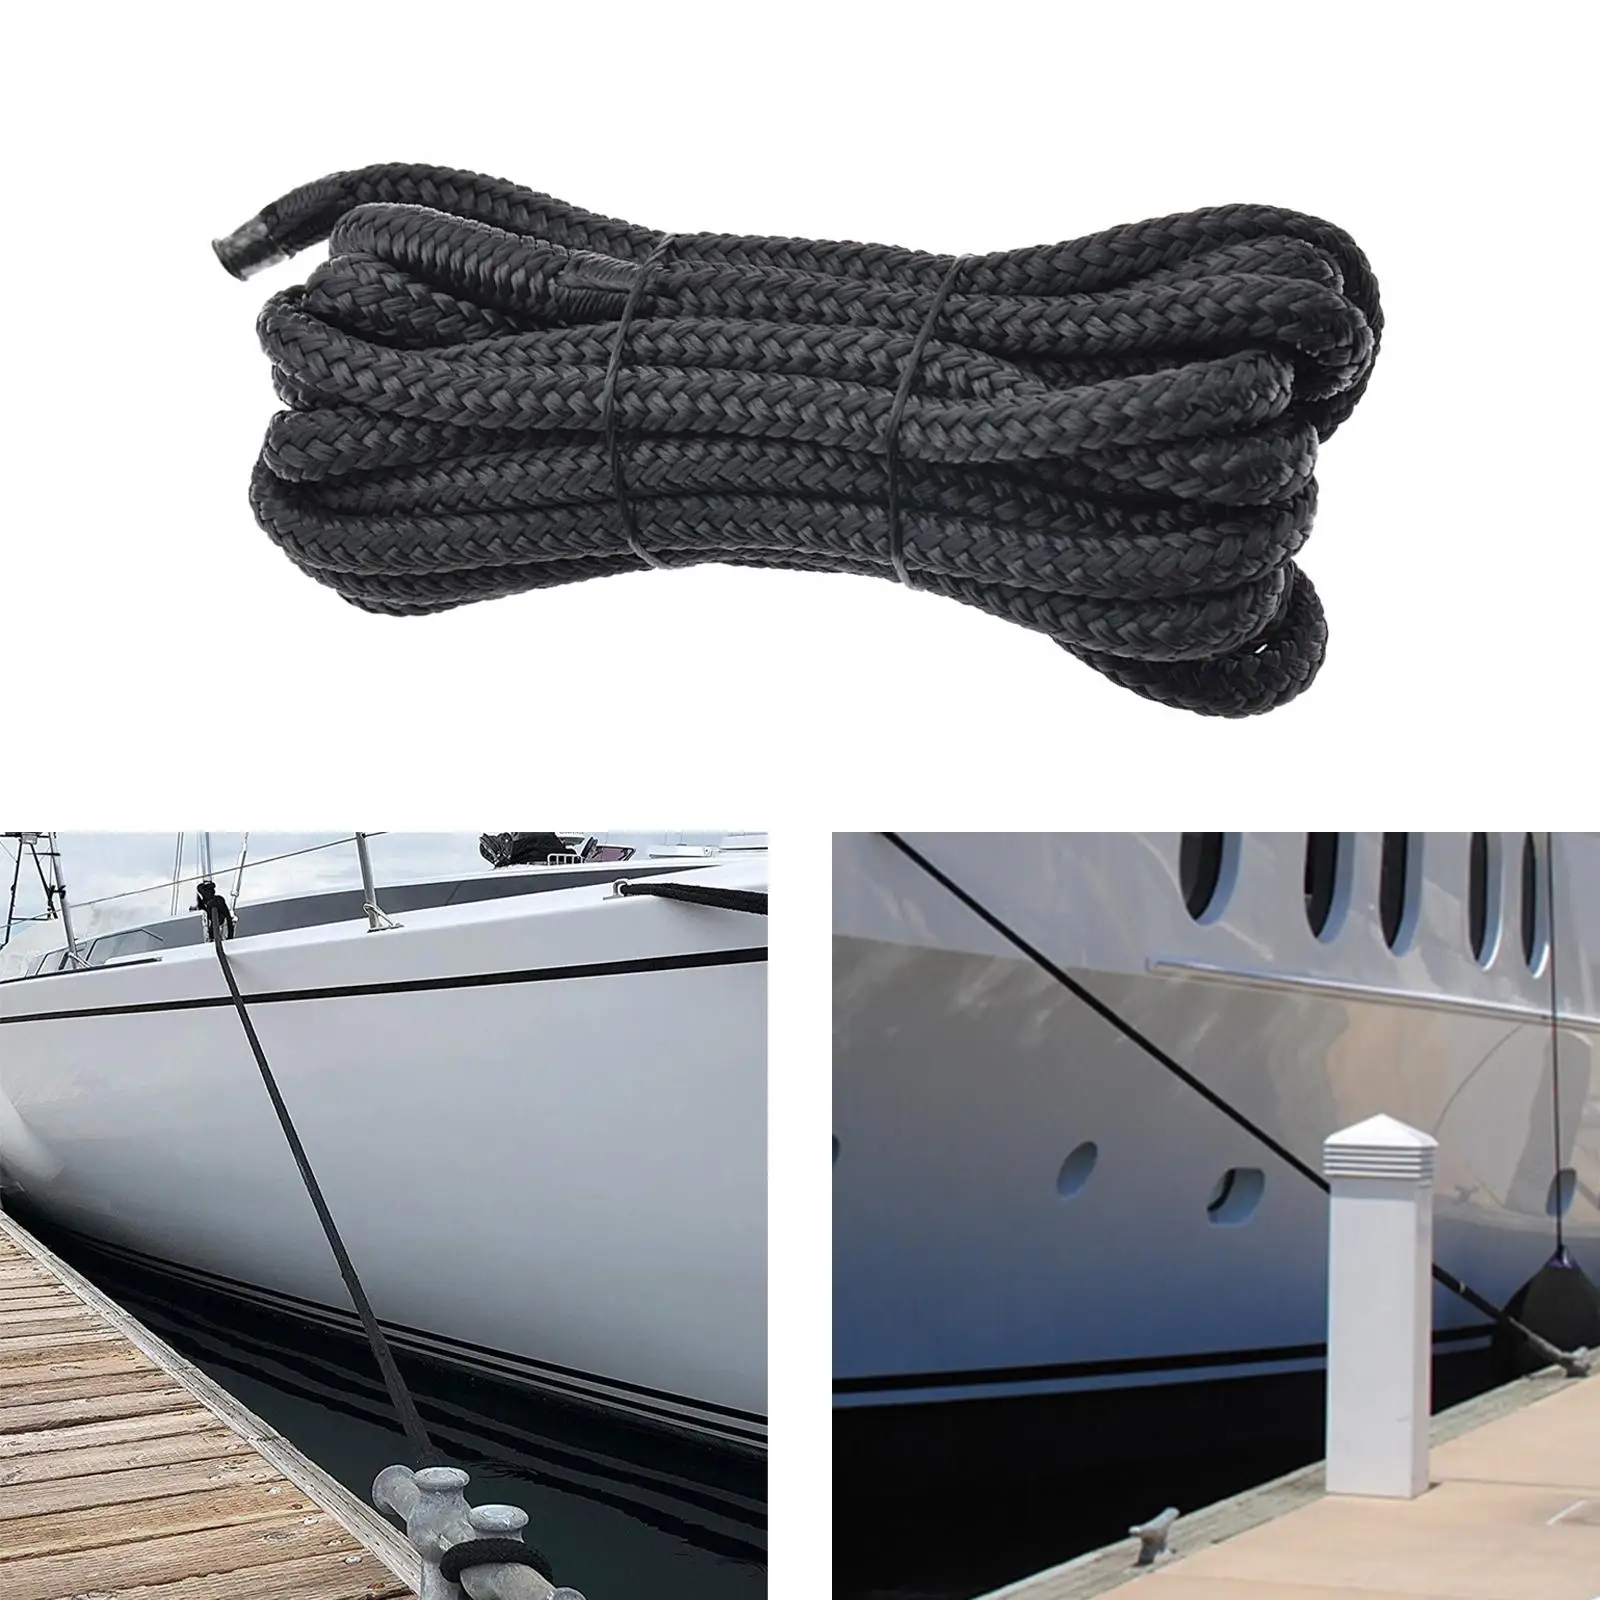 High Performance Double Braid Nylon , W/Protective Cover with Eye  AntiMarine Boats Ropes, Docking Rope for Kayak